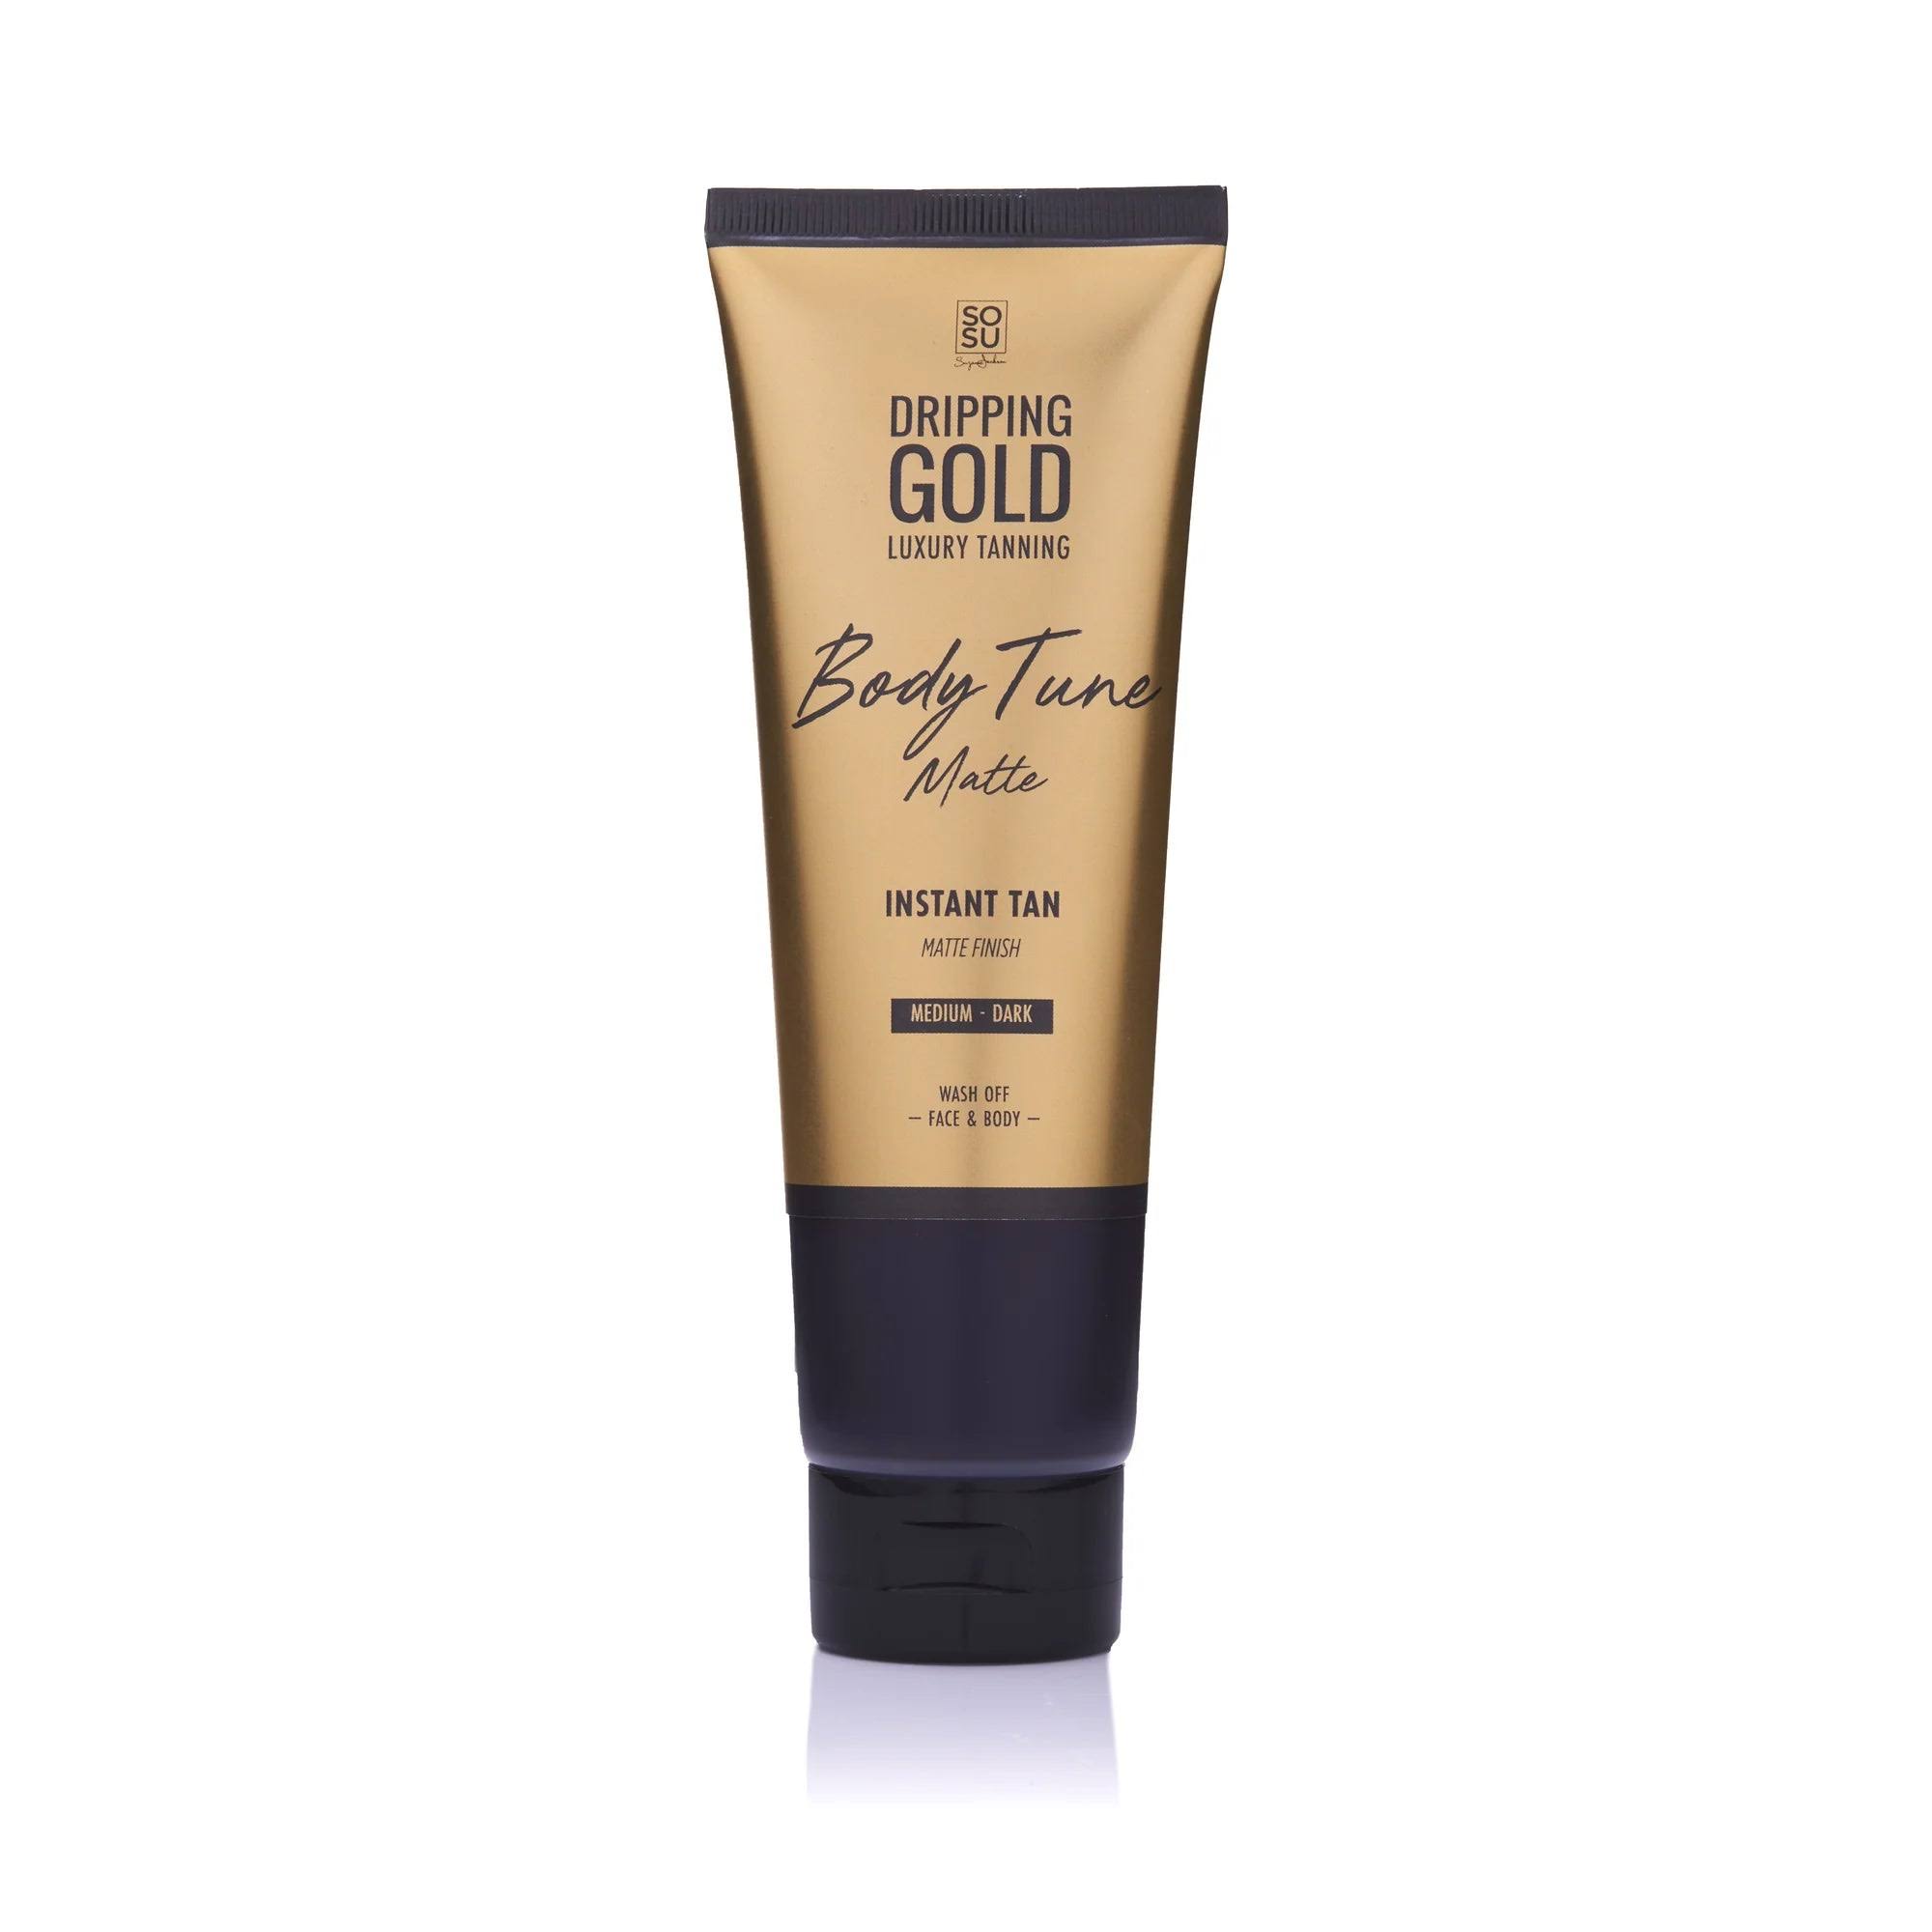 Dripping Gold Body Tune Instant Tan